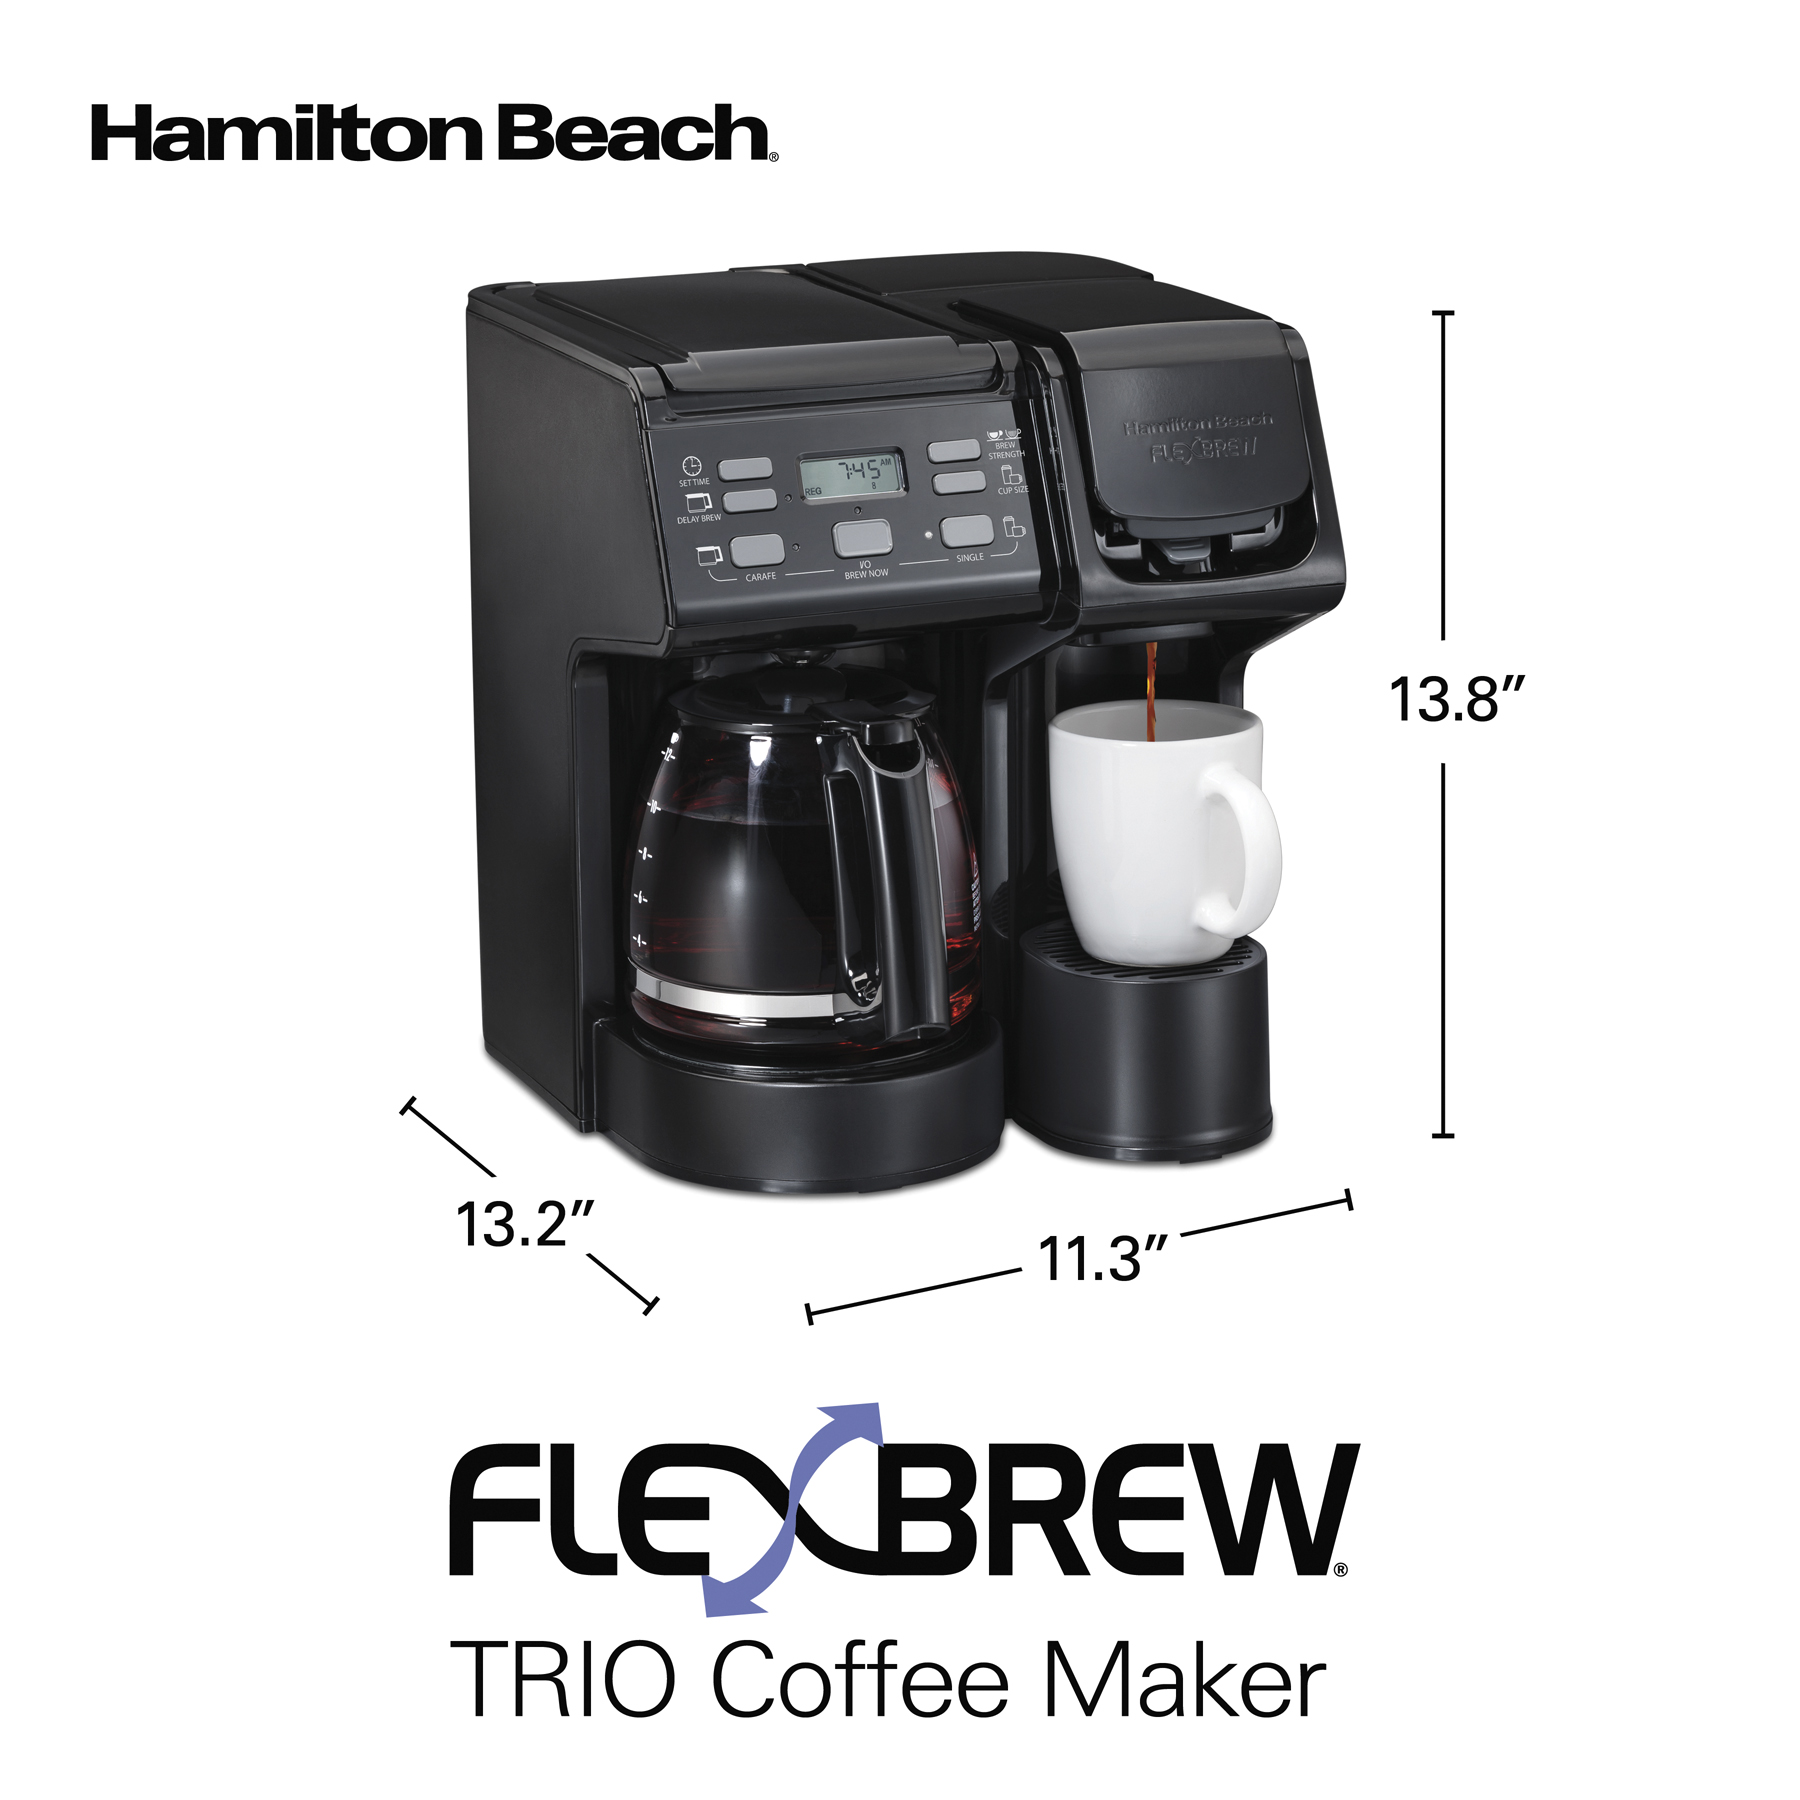 Renewed 3 Brewing Options Reservoir Compatible with Pods or Ground Coffee , Black and Silver 49948 Hamilton Beach FlexBrew Single-Serve Maker with 40 oz 